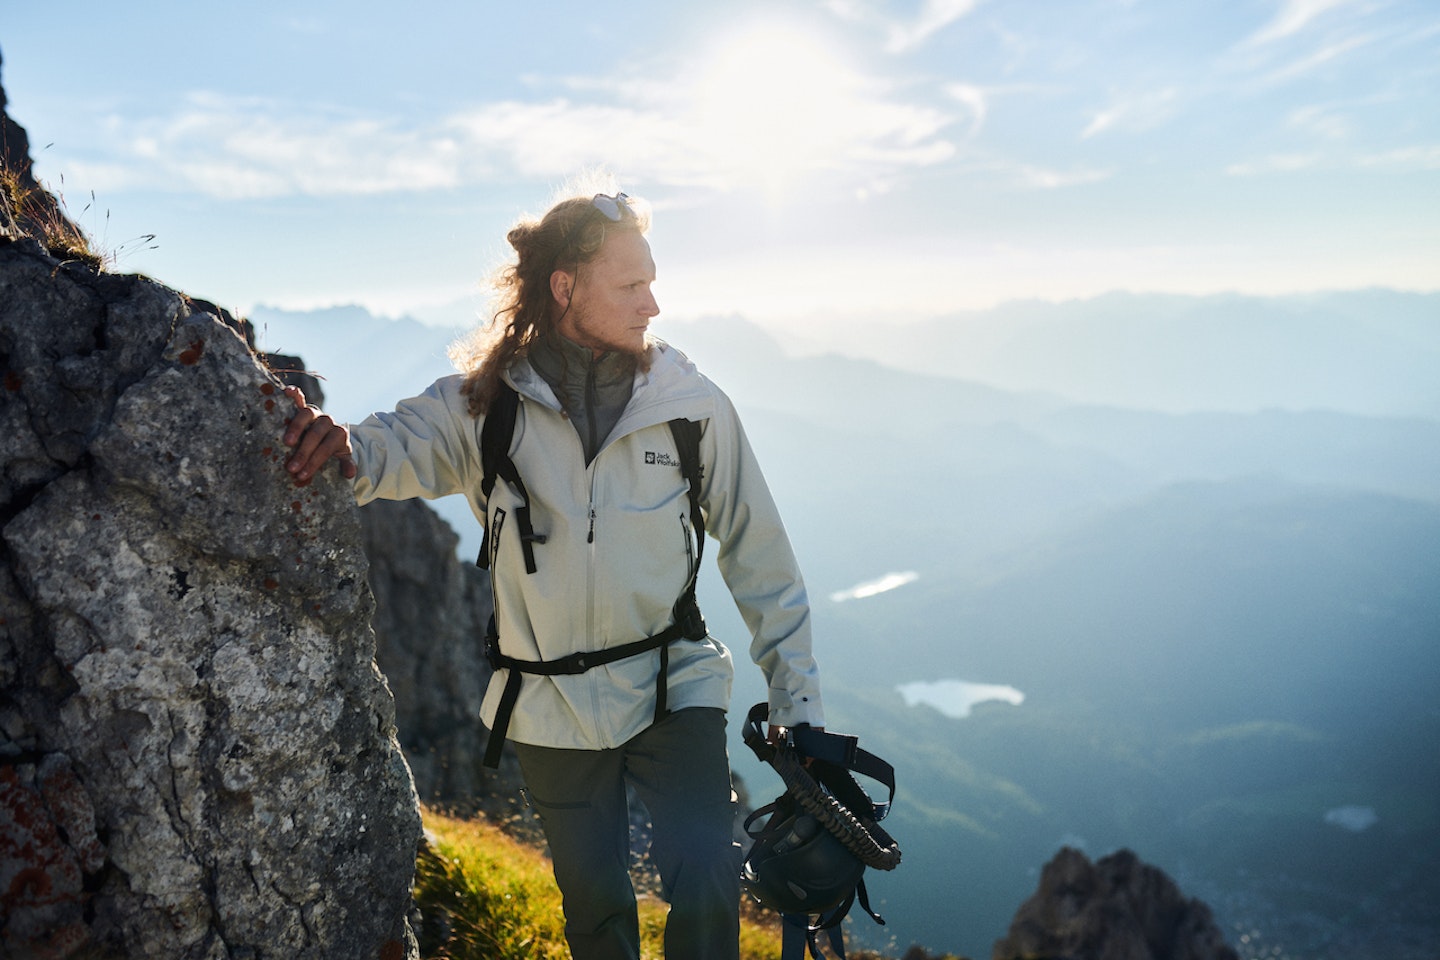 First look: Jack Wolfskin spring/summer active collection | LFTO